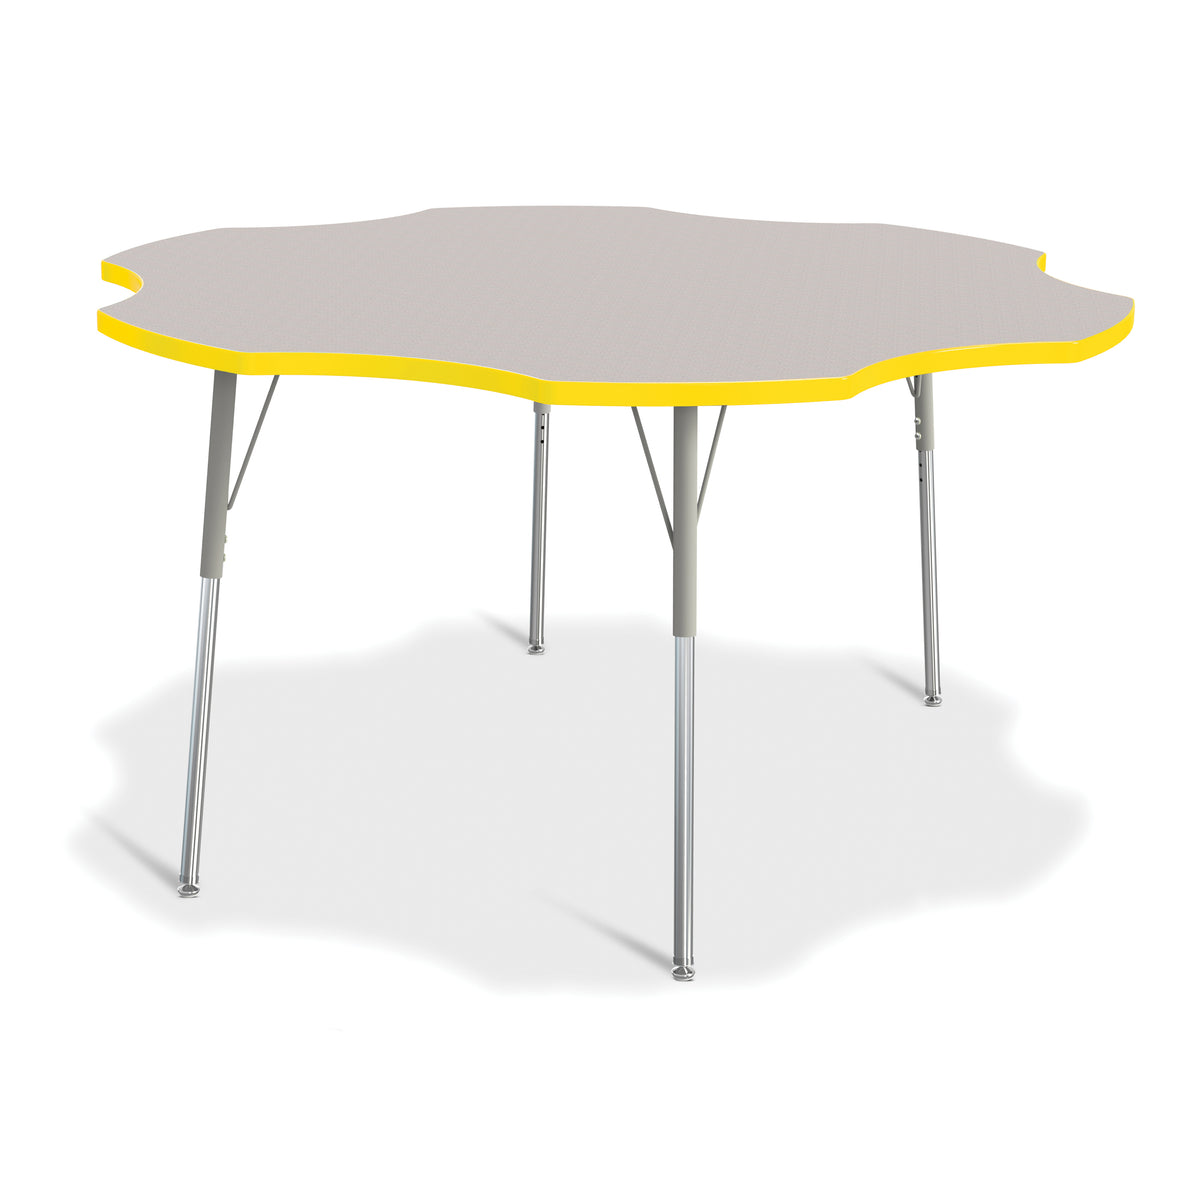 6458JCA007, Berries Six Leaf Activity Table - 60", A-height - Freckled Gray/Yellow/Gray